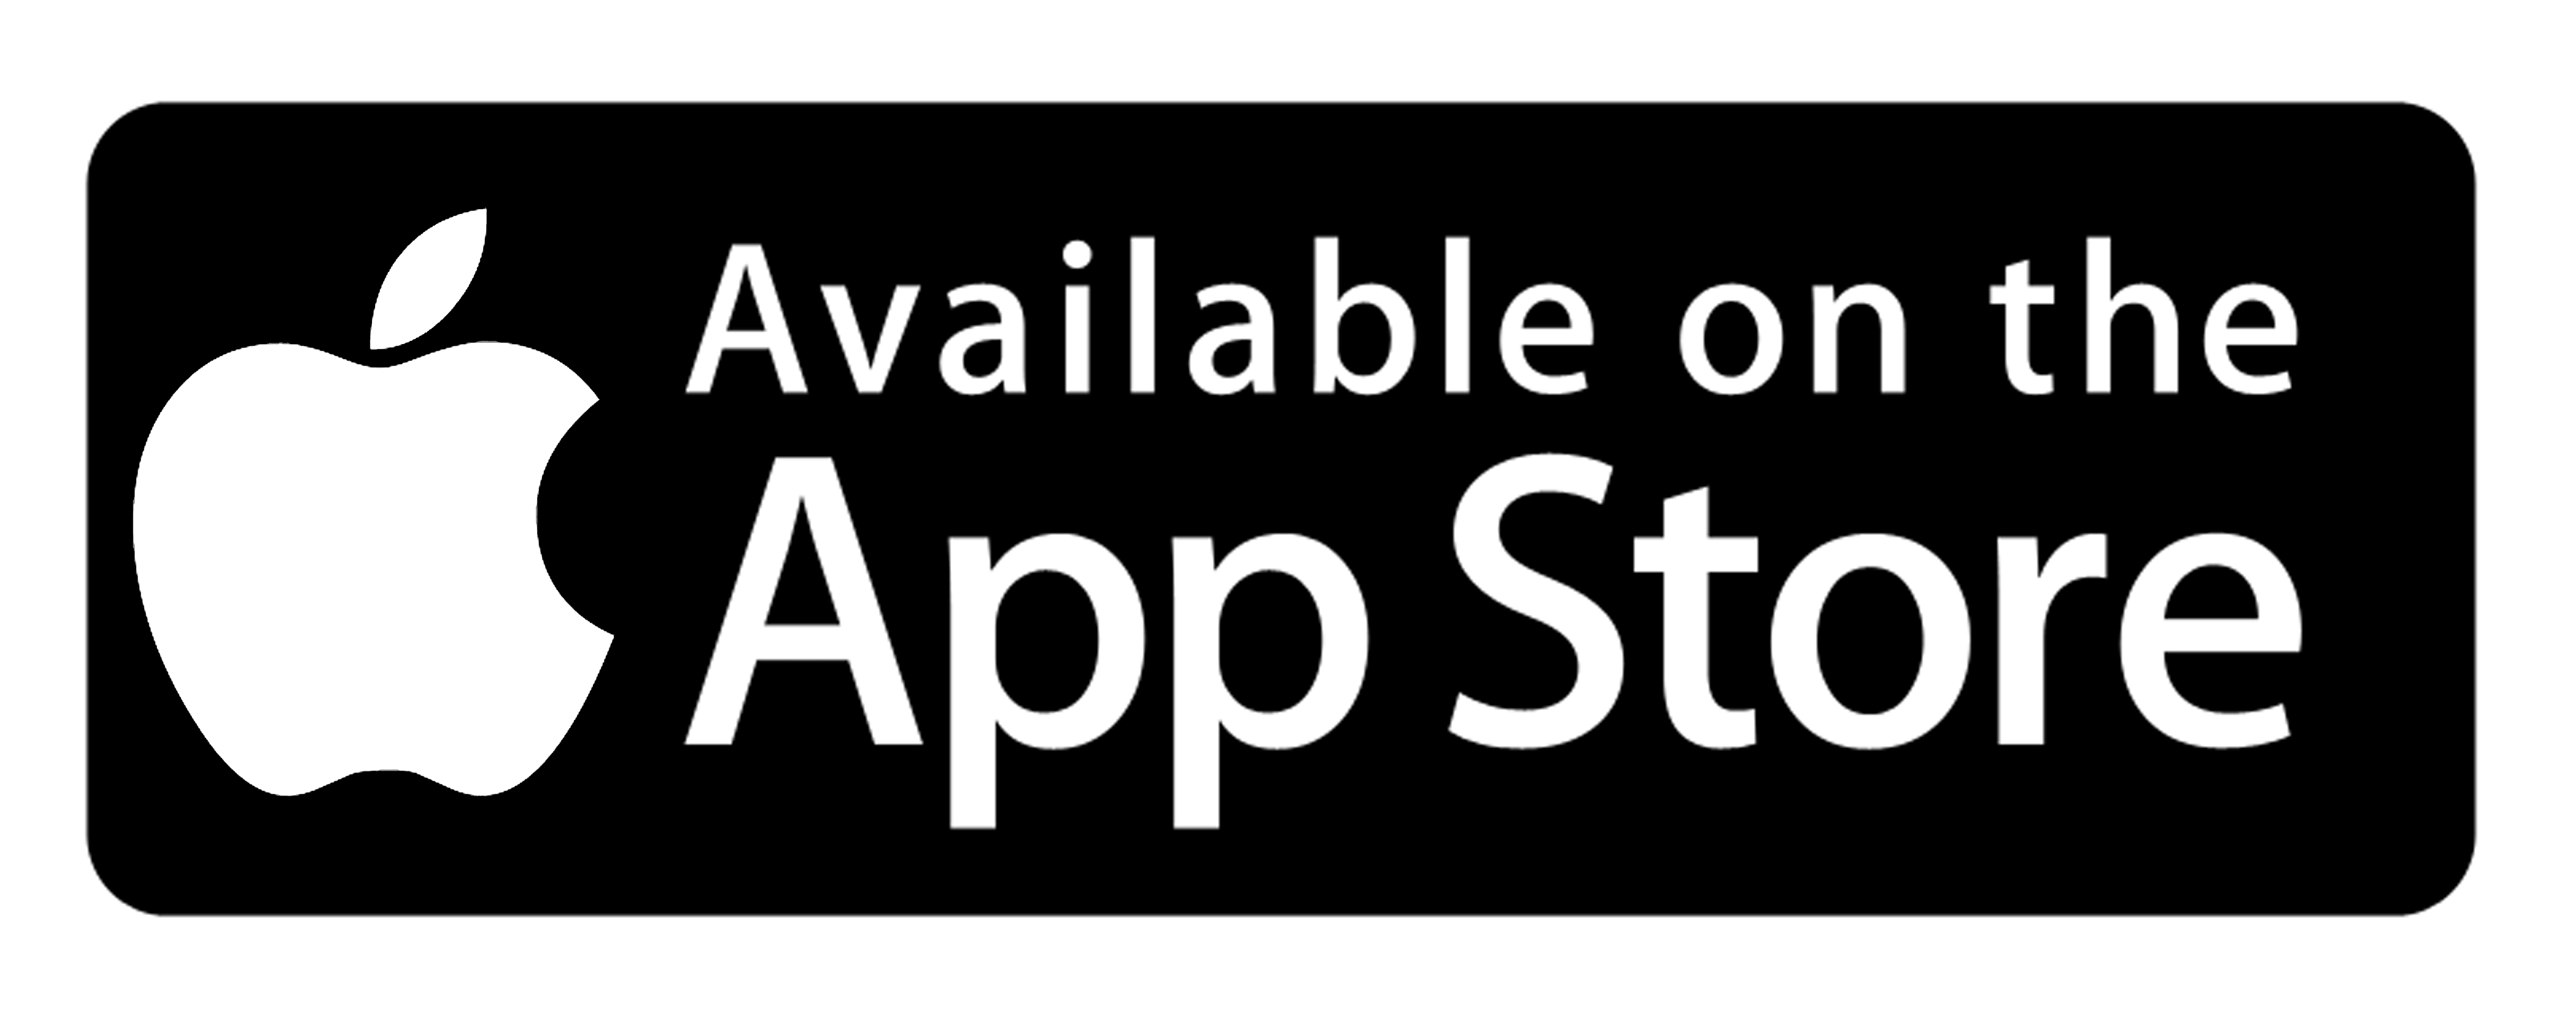 Apple App Store Logo - appstore - airconwithme